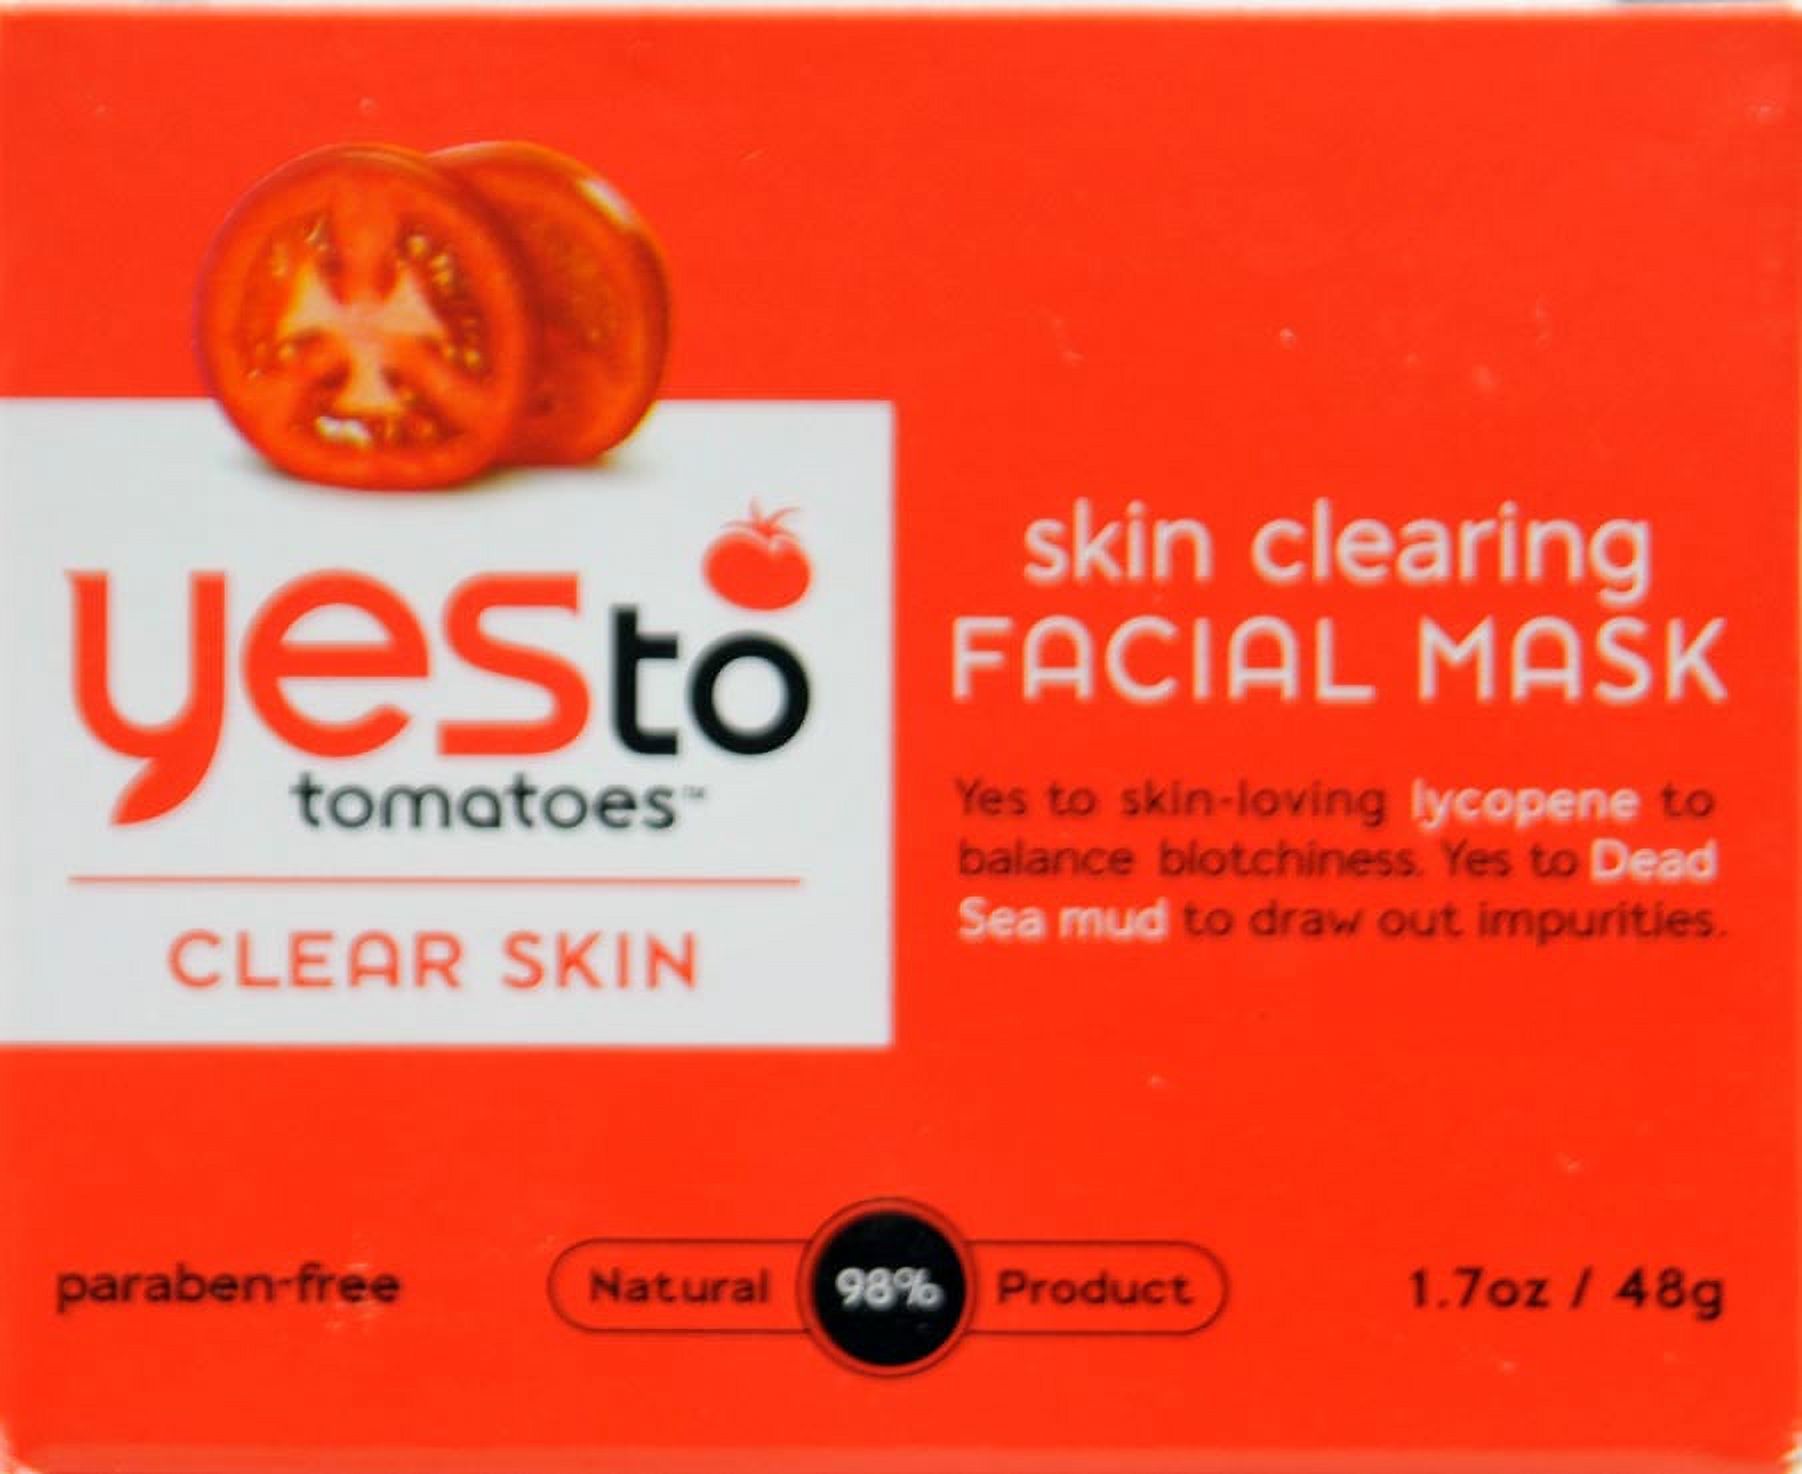 Yes To Yes To Tomatoes Facial Mask 1.7 oz - image 3 of 5